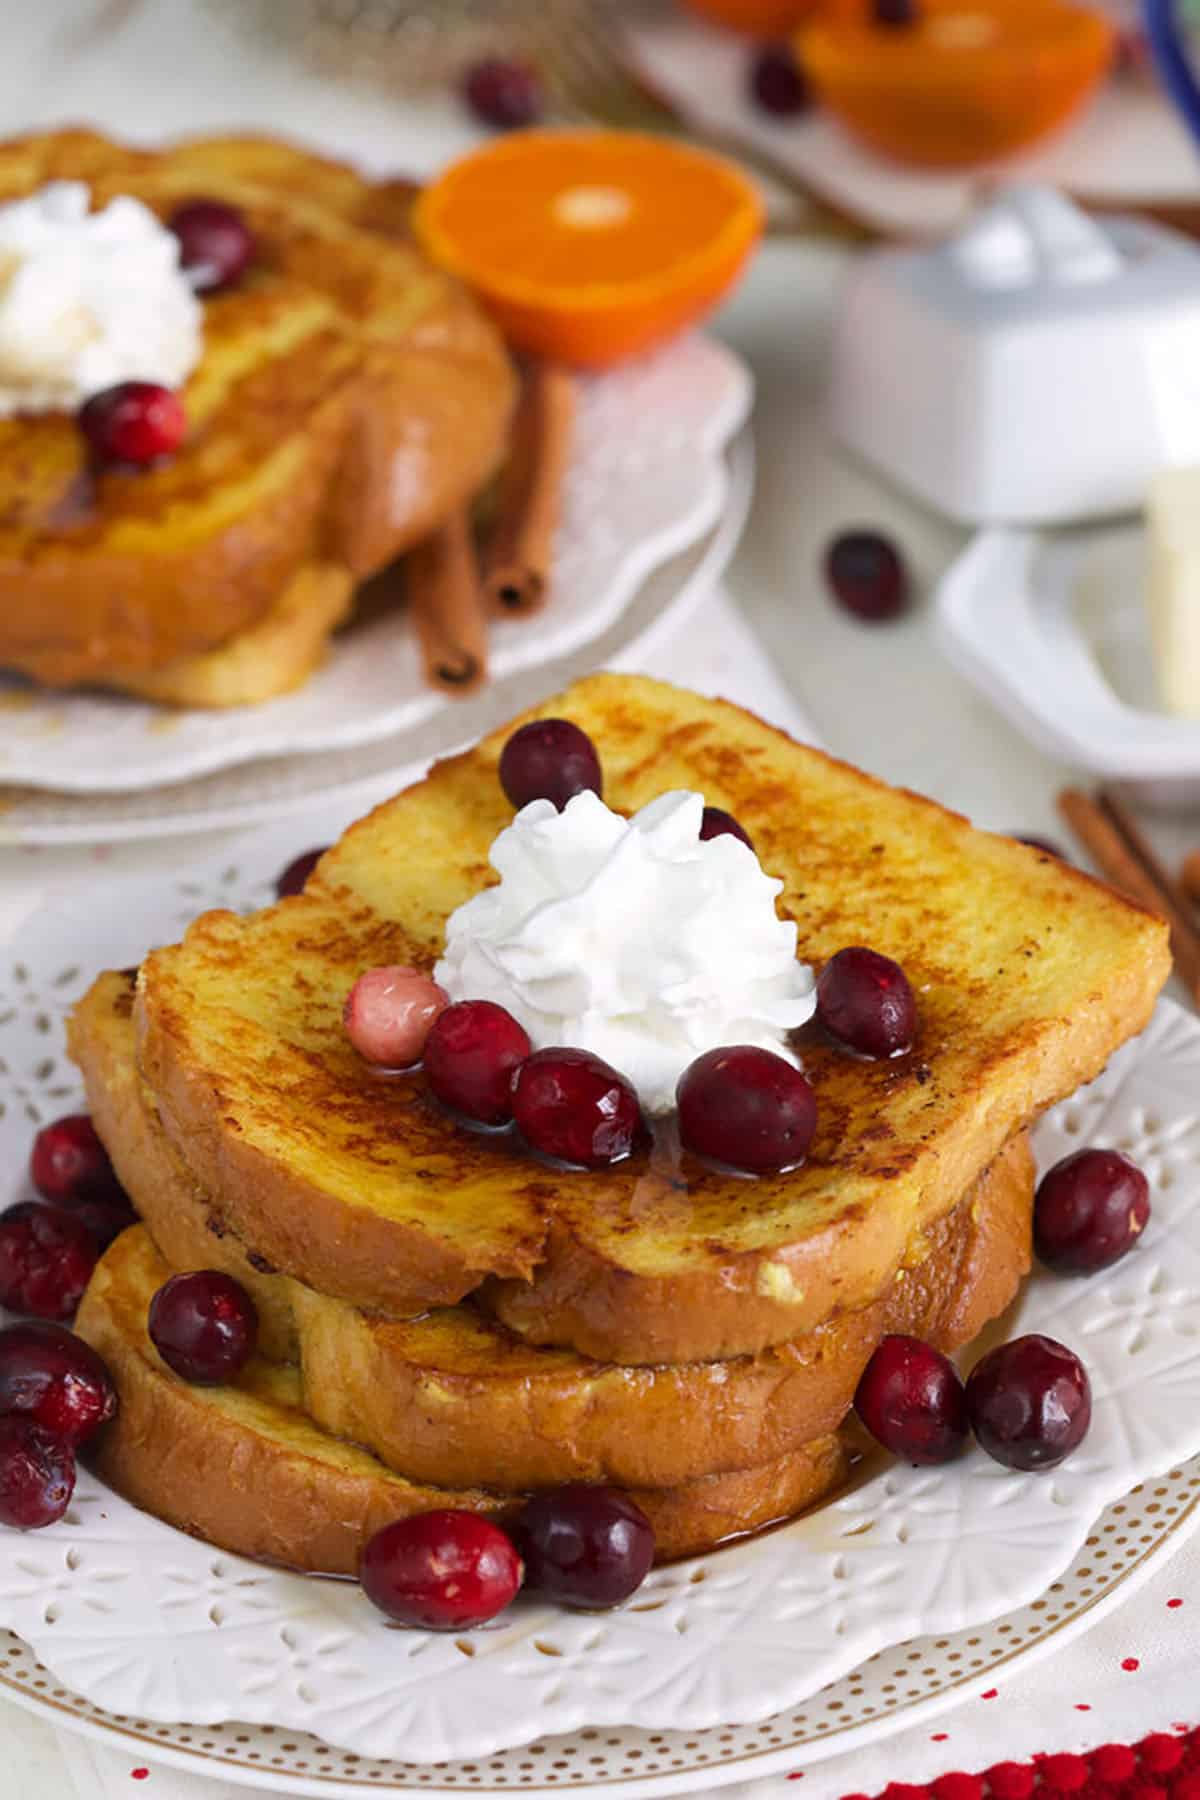 A stack of french toast is presented with cream and berries on a white plate.